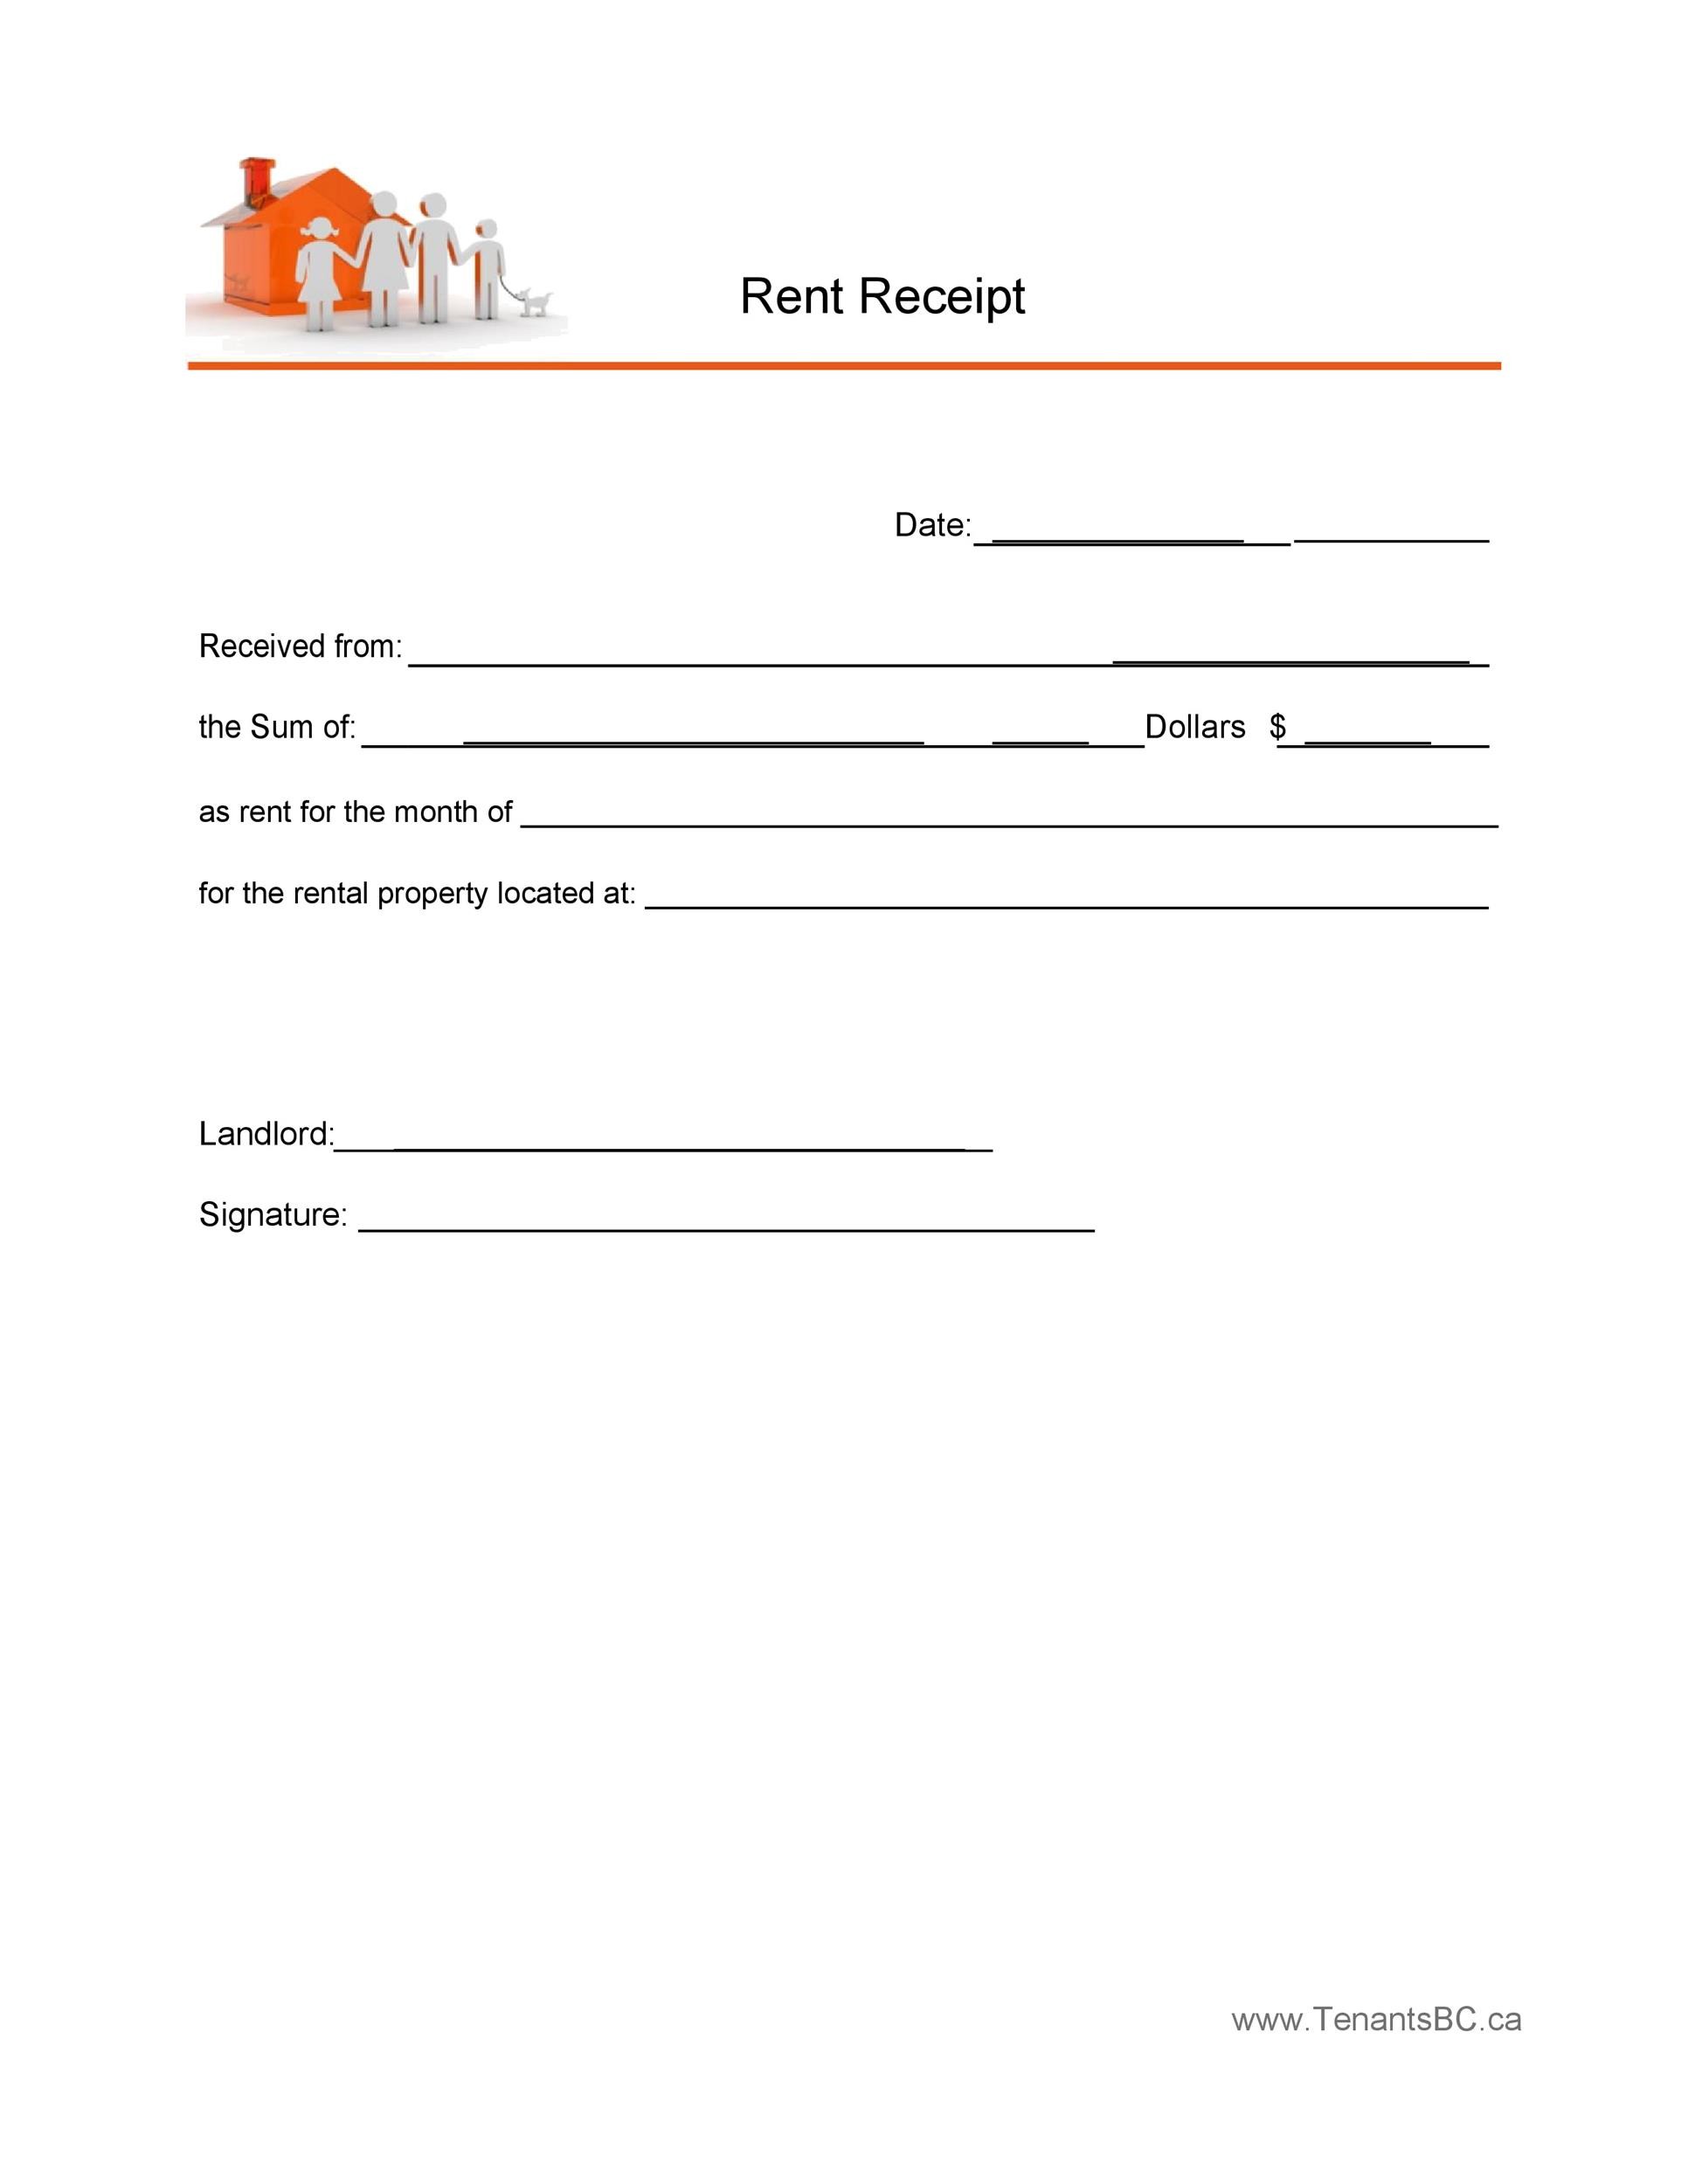 Paid In Full Receipt Template Free For Your Needs